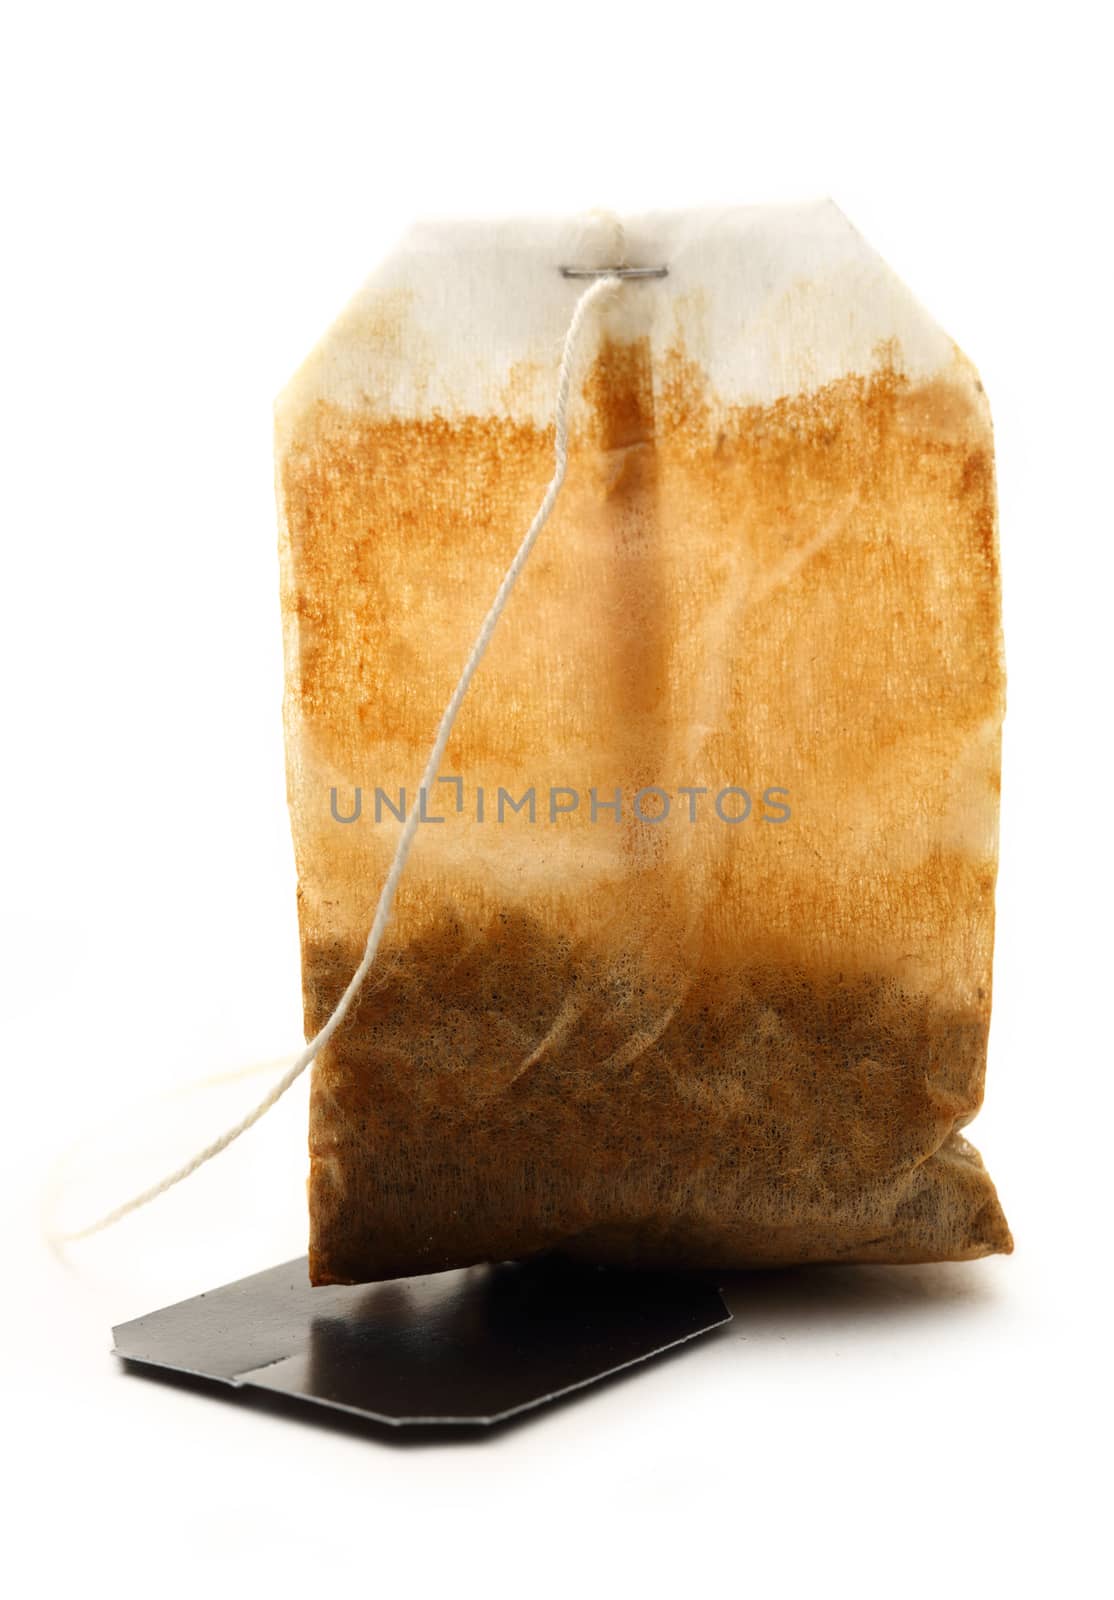 Used tea bag with label on white